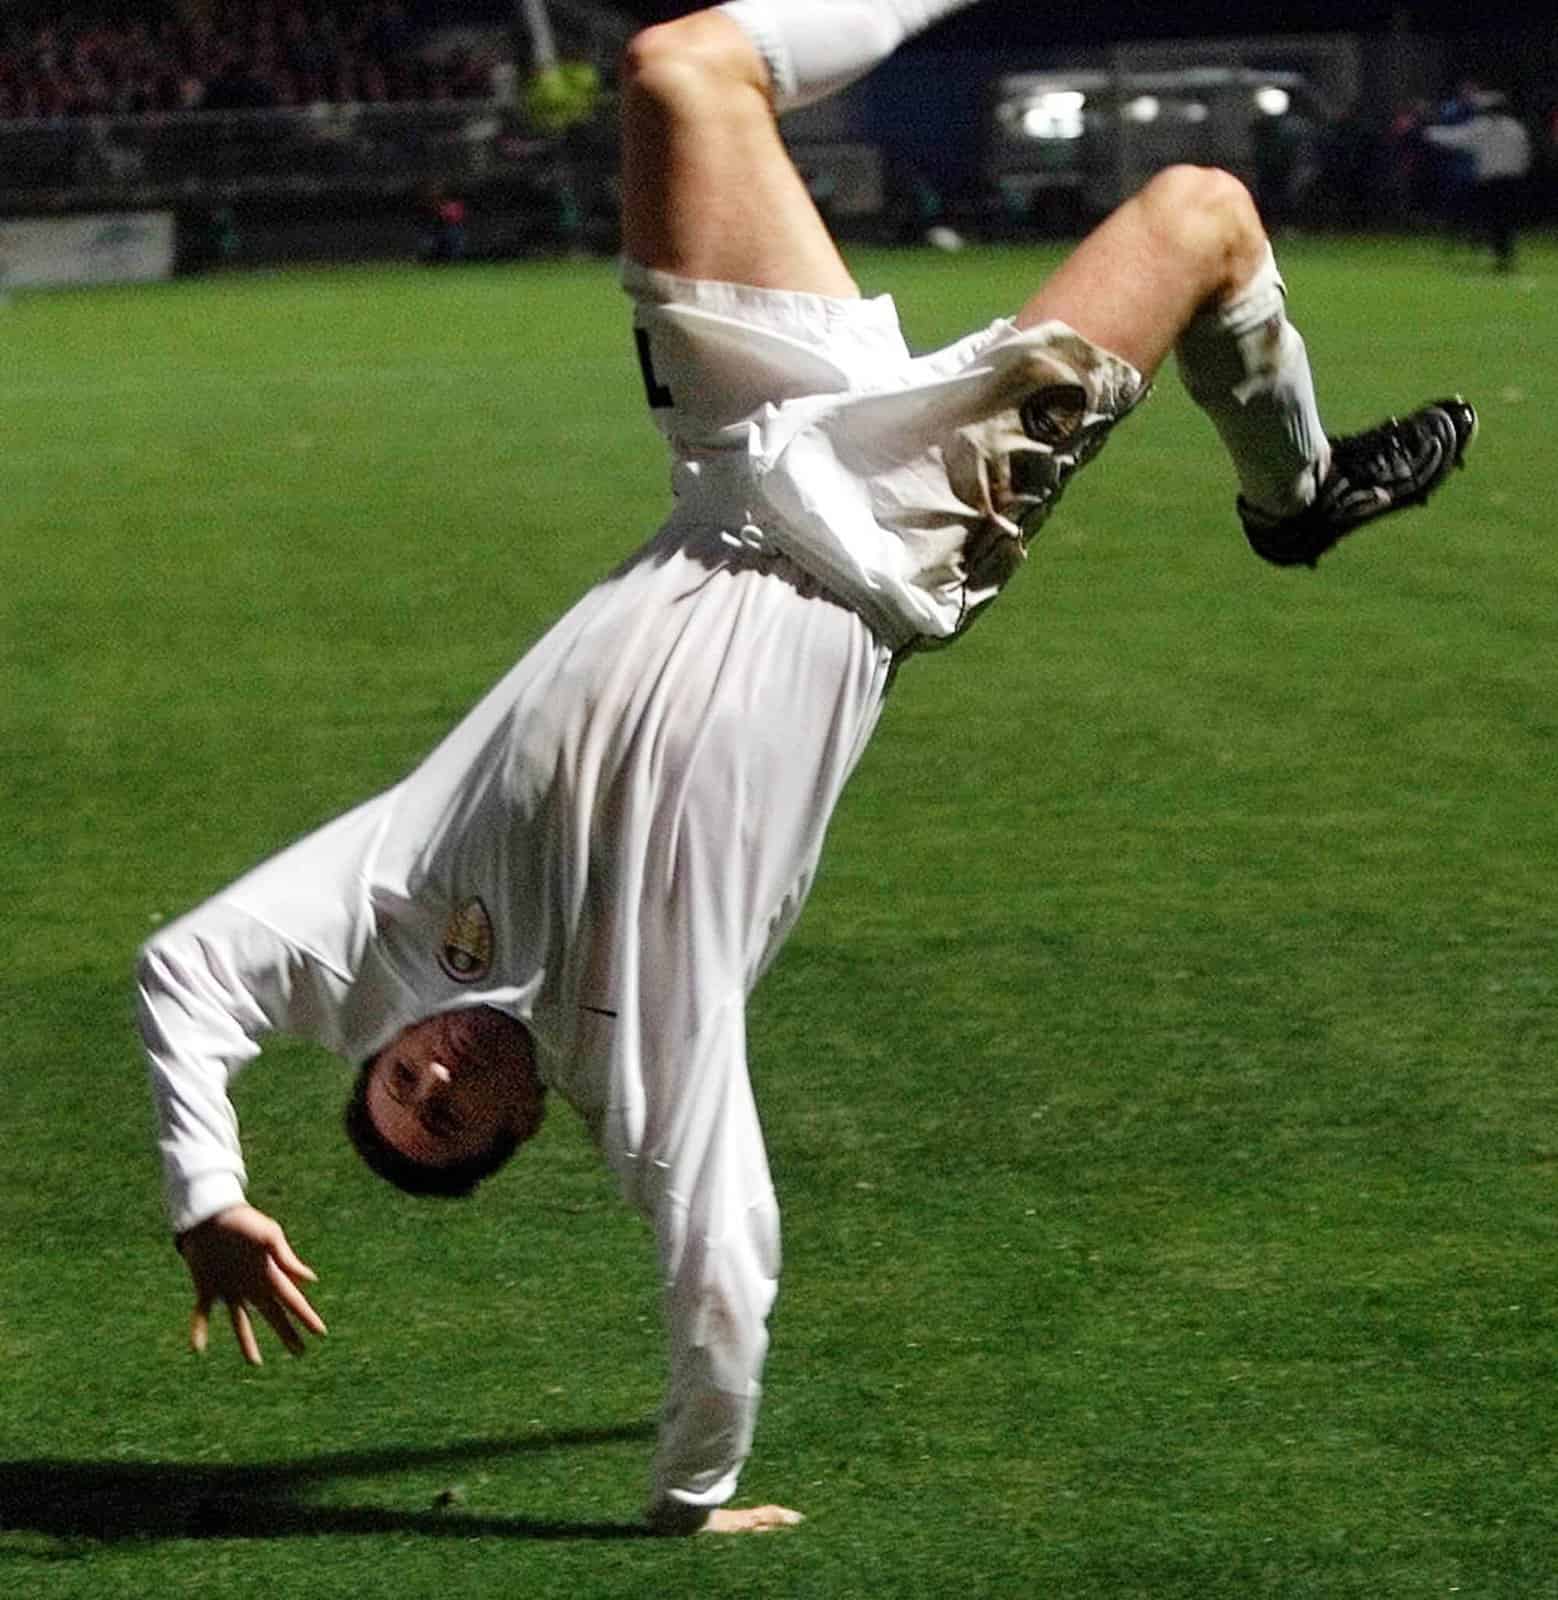 Robbie Keane celebrating his goal against Troyes with a trademark cartwheel. He's captured fully upside down in this photo